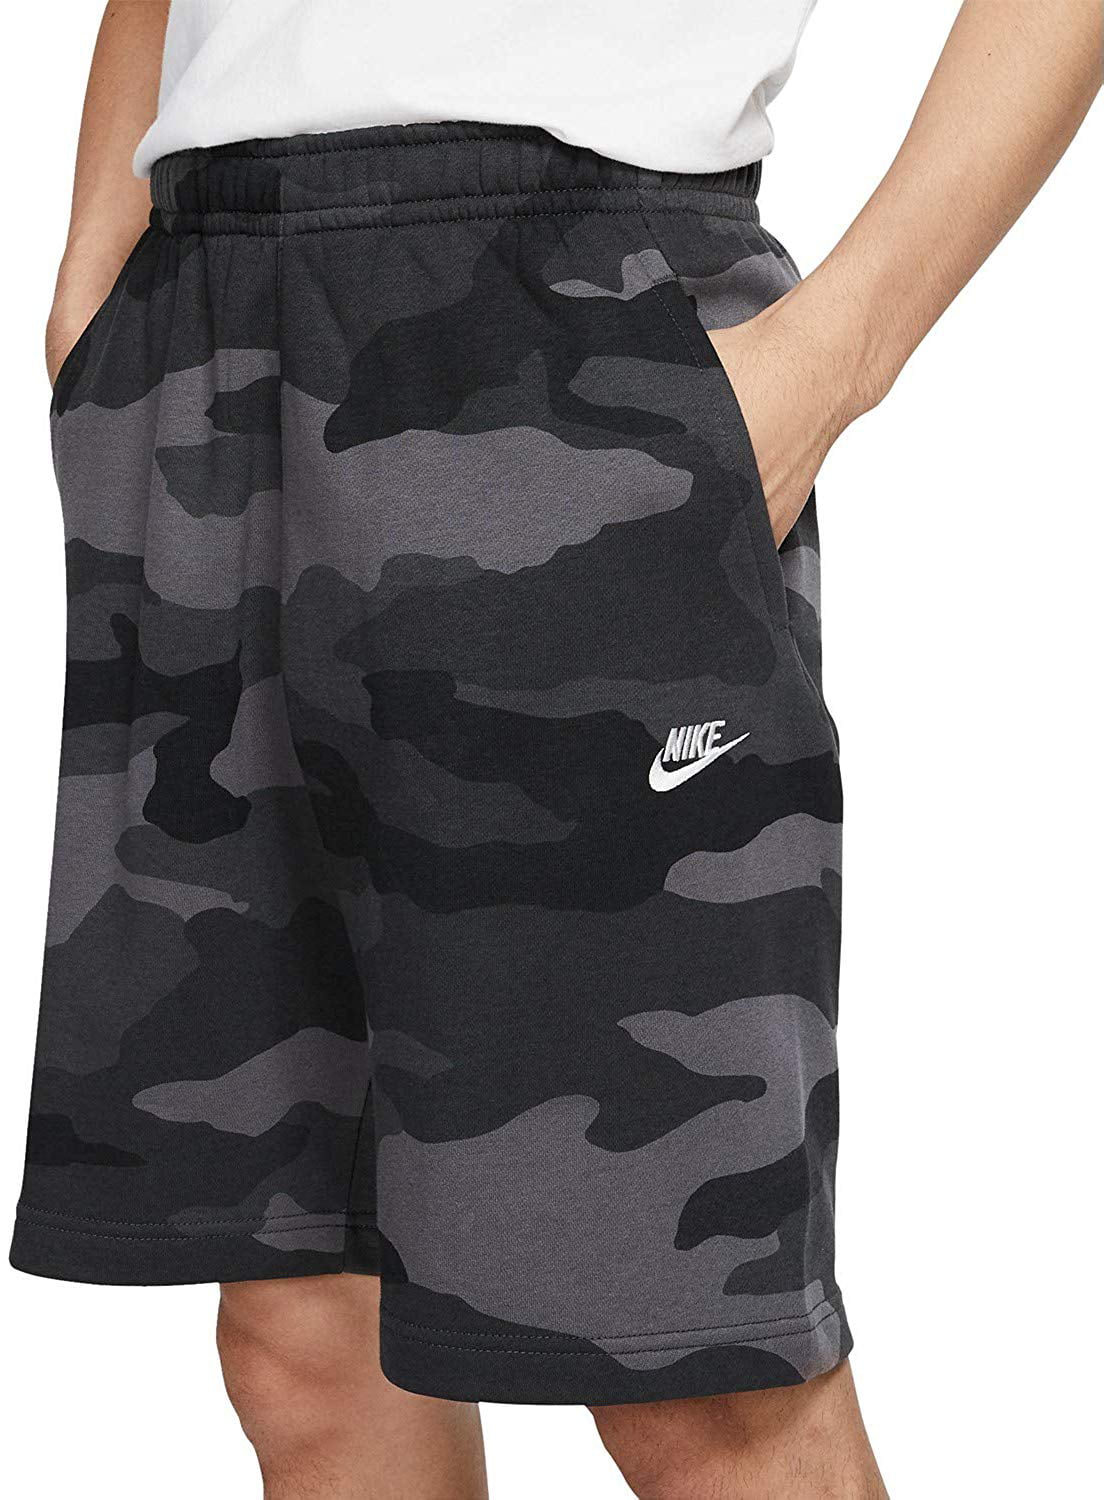 6 Day Nike club fleece workout shorts for Weight Loss